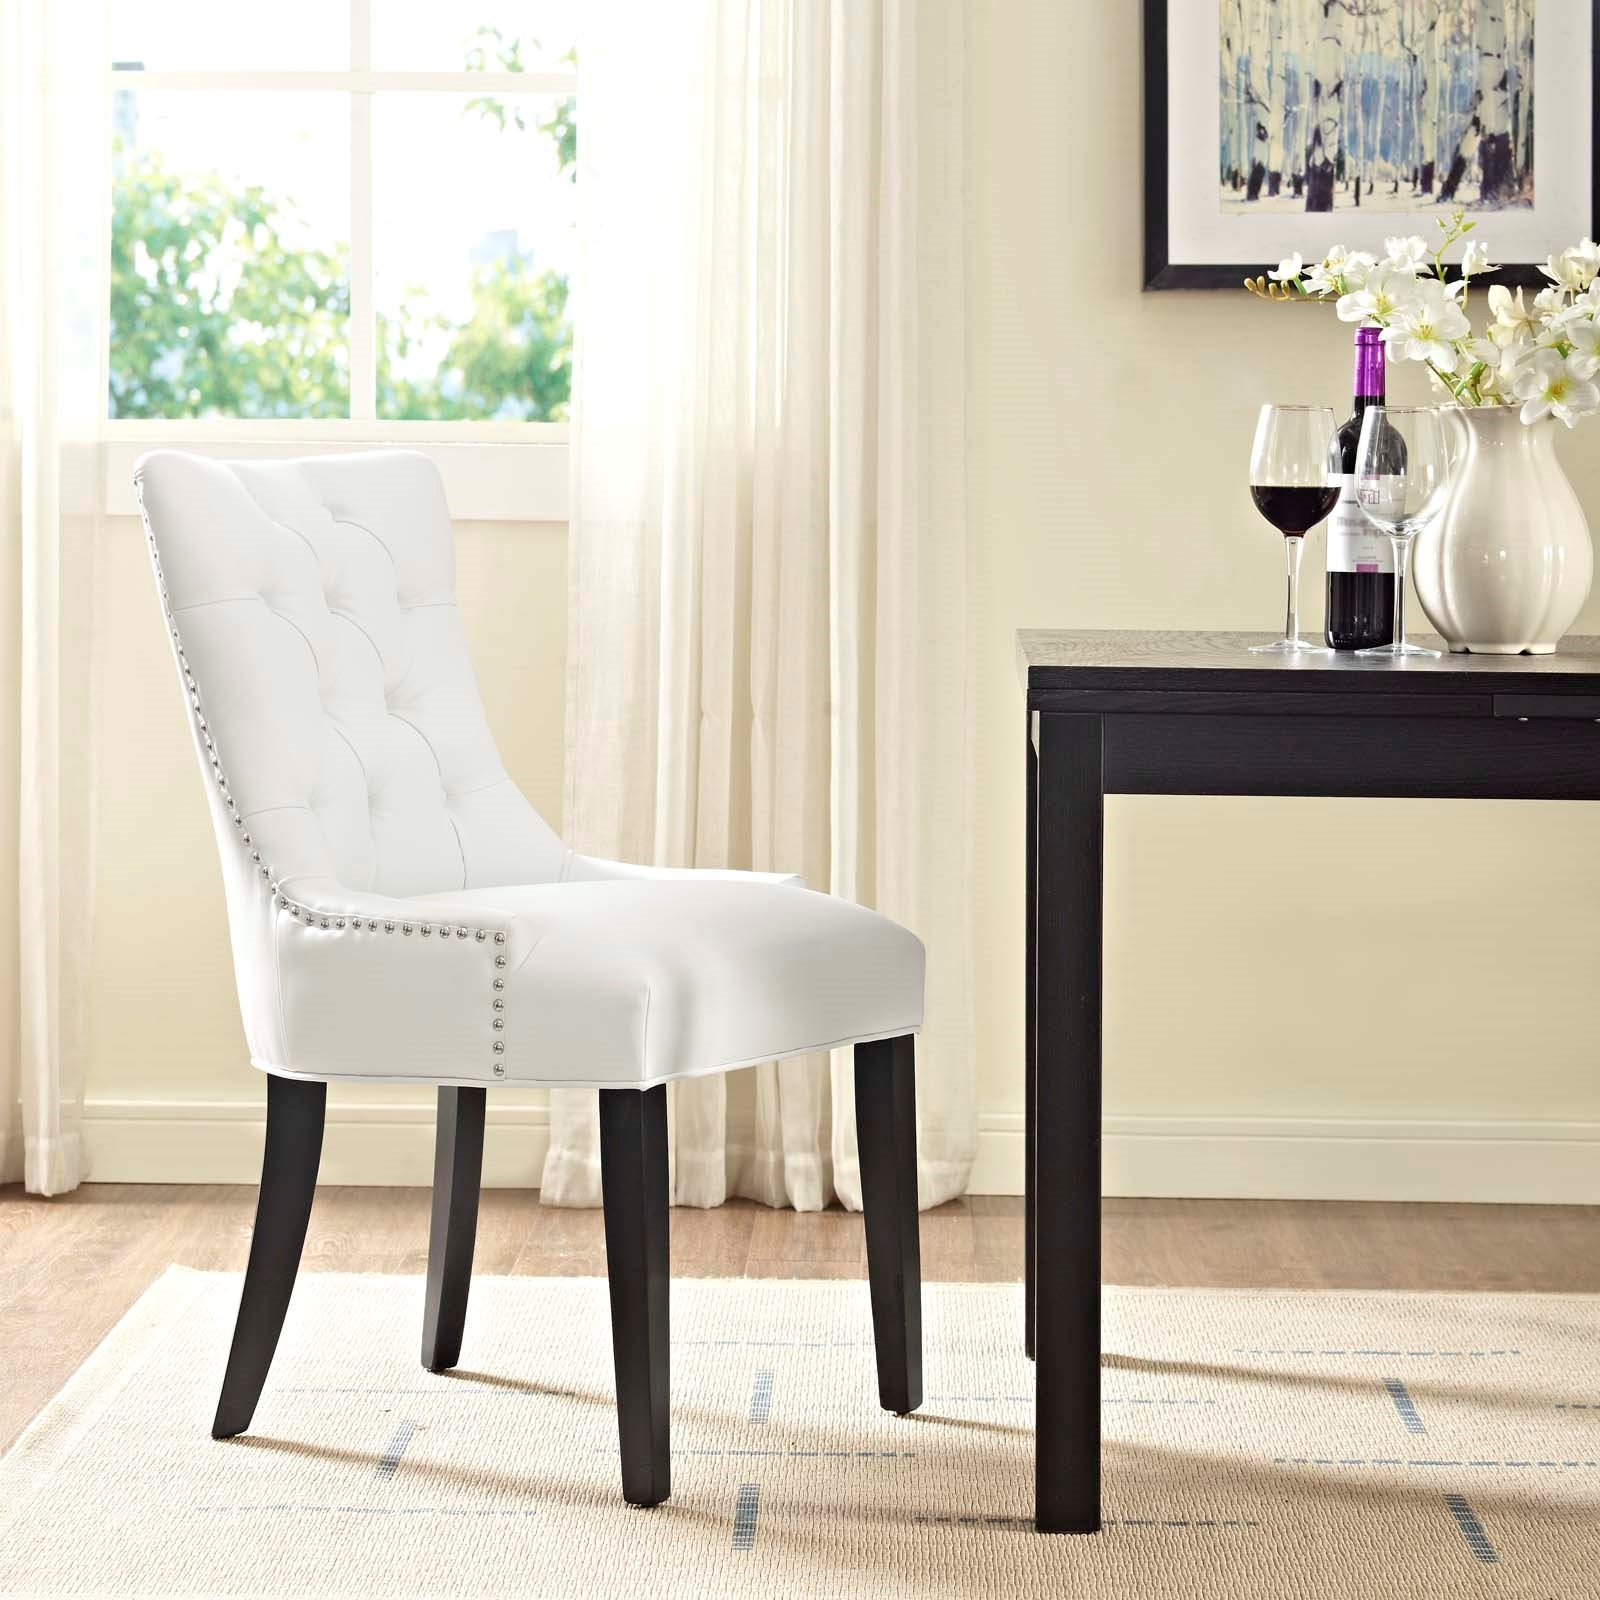 Regent Tufted Faux Leather Dining Chair in White - Hyme Furniture